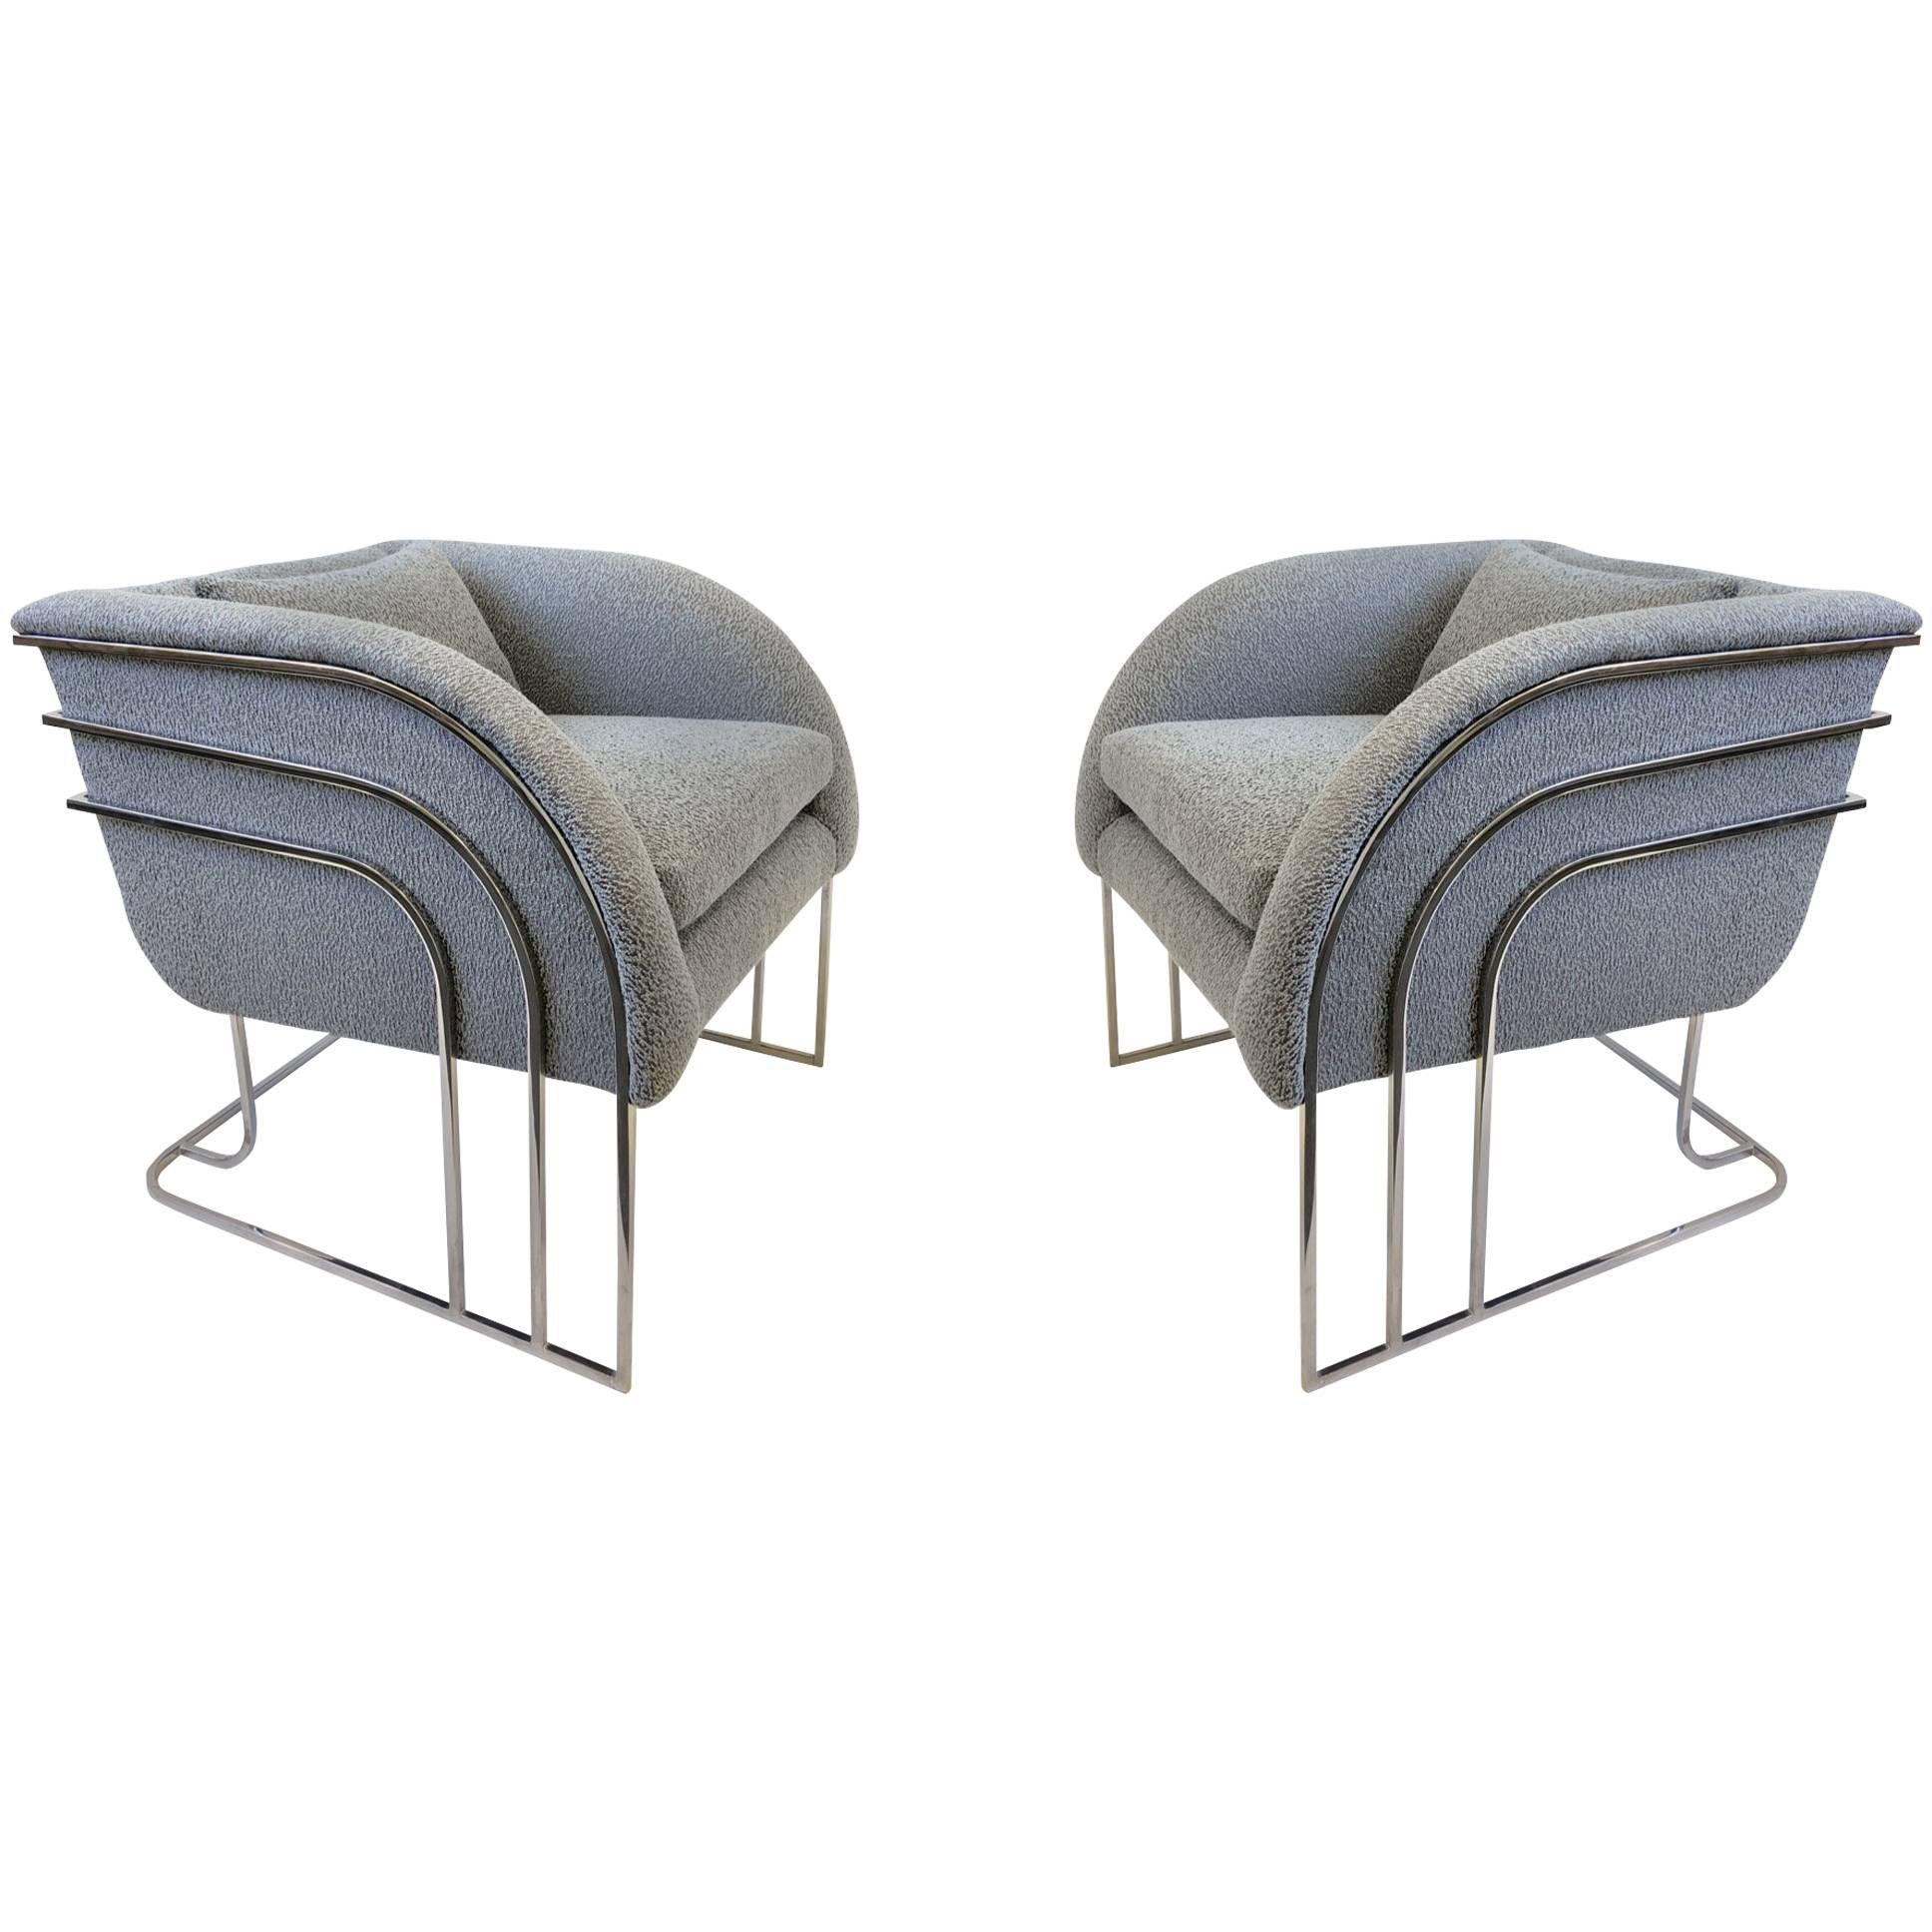 Pair of Rare Chrome Lounge Chairs by George Mergenov for Weiman/Warren Lloyd